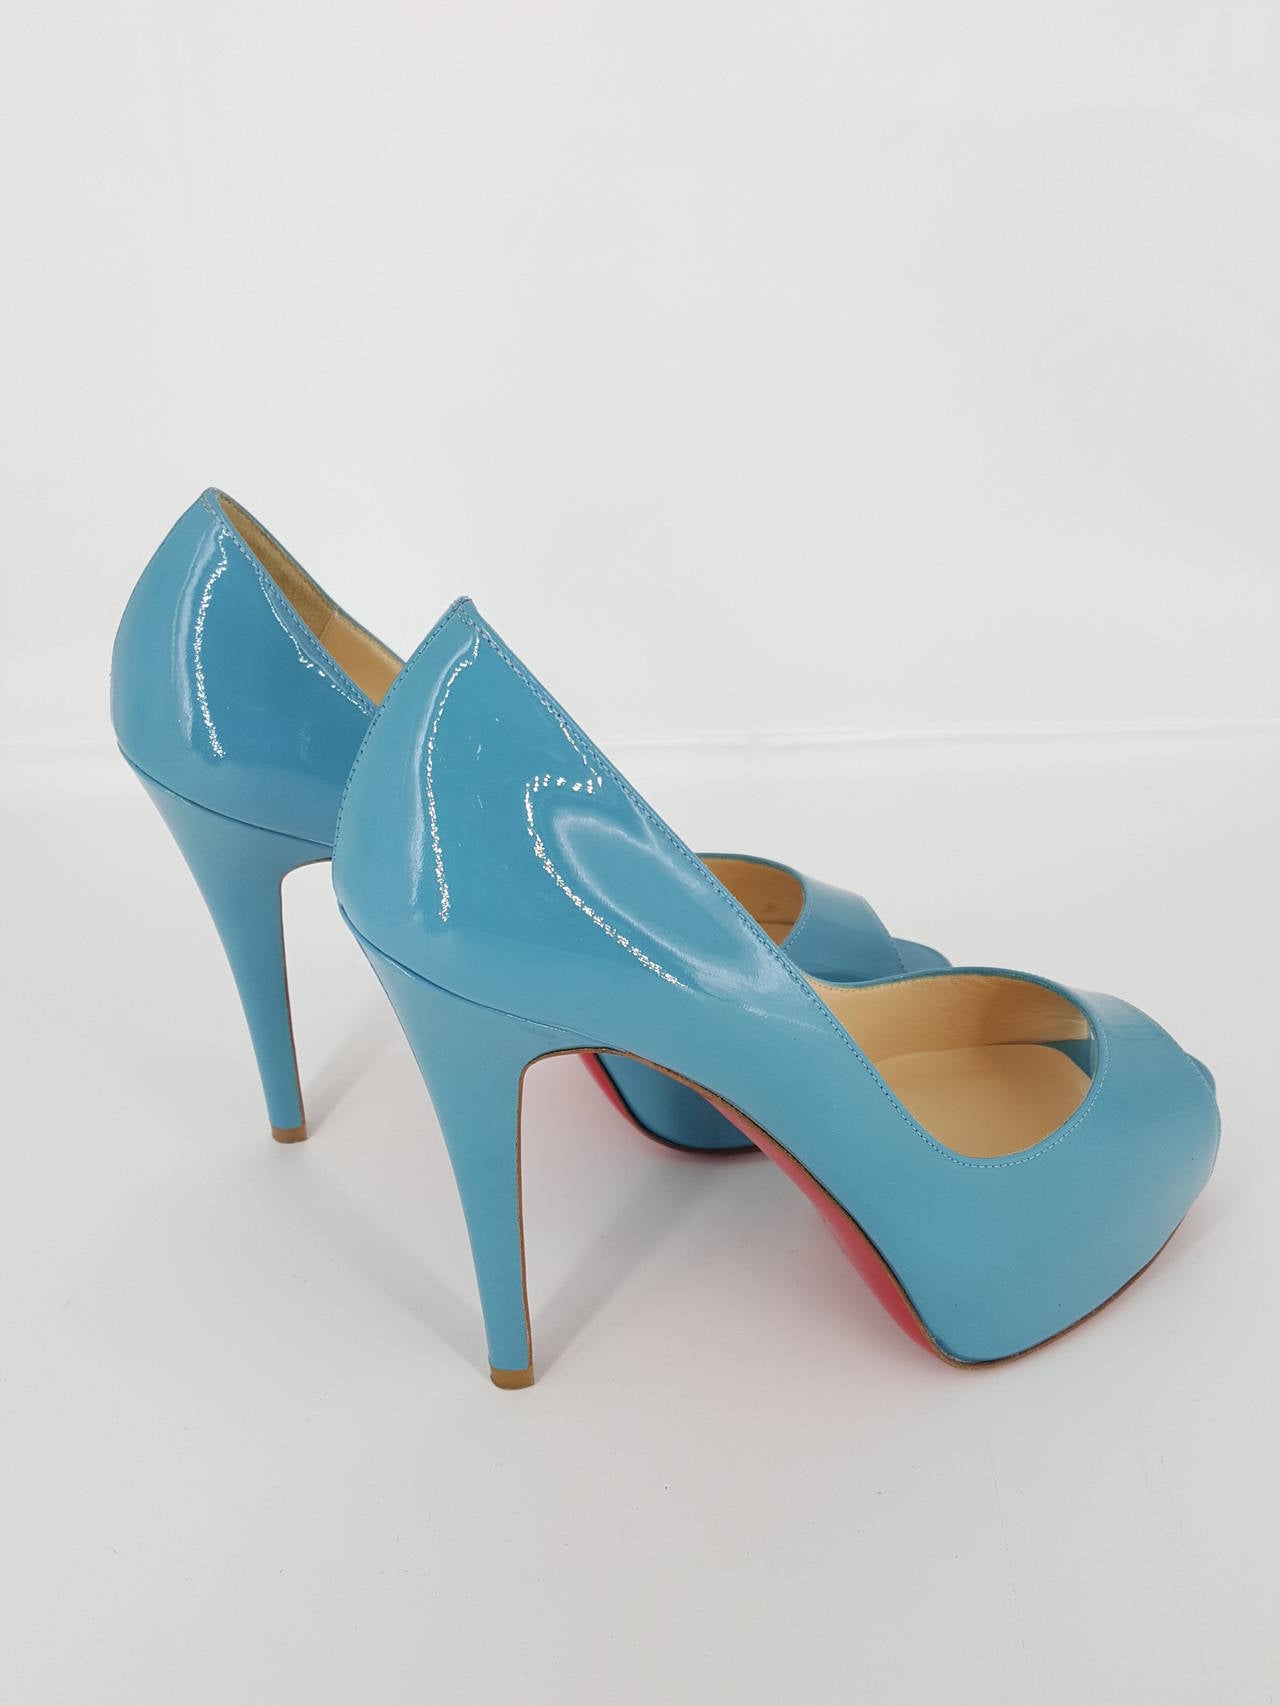 Offered for sale are these Christian Louboutin peep toes pumps in a beautiful turquoise patent leather. These have never been worn.  The turquoise color is outstanding.  They are in size 36 1/2 an the heel height is 4 3/4